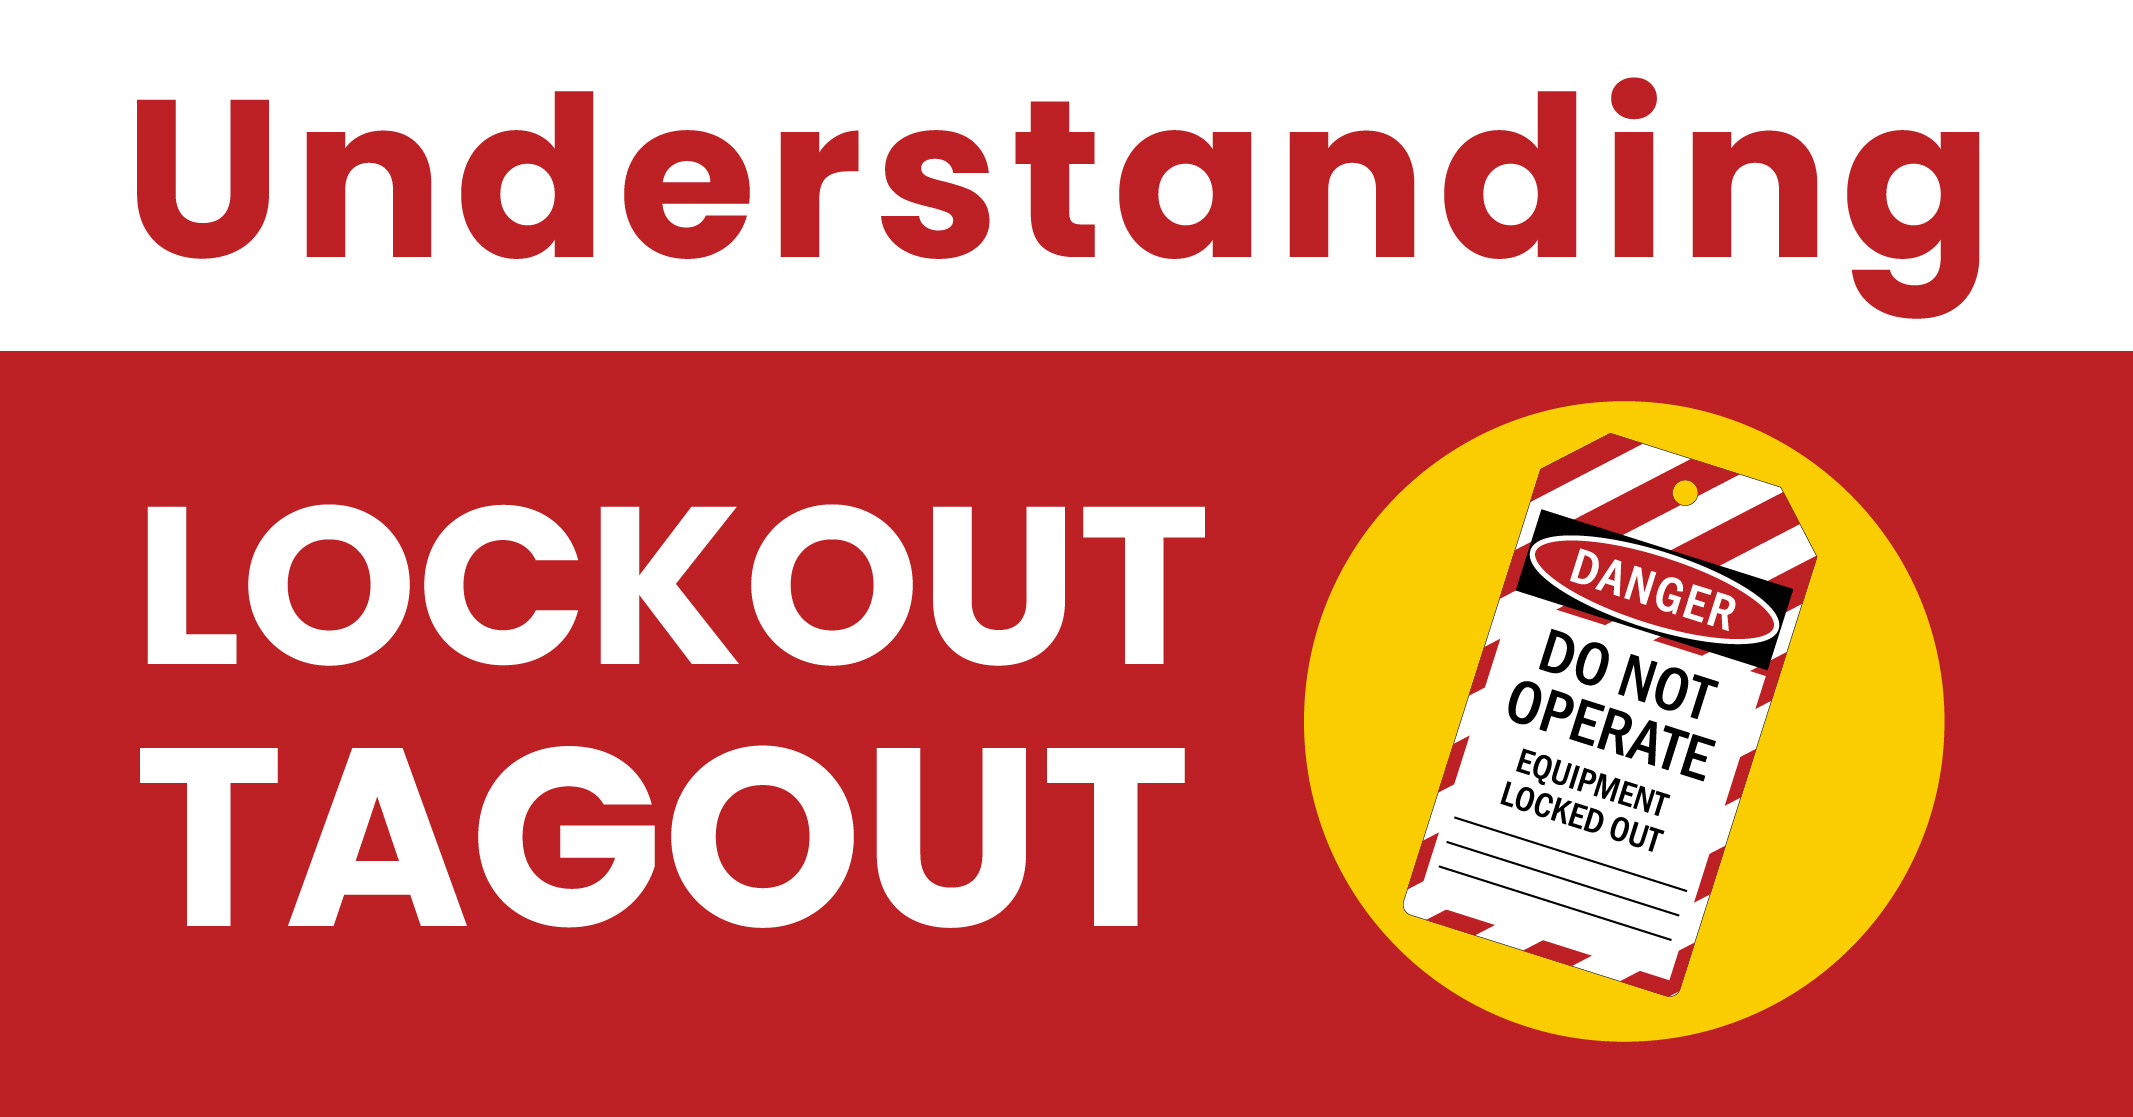 Image reads "Understanding Lockout Tagout" on a white and red background with a warning tag in a yellow circle.